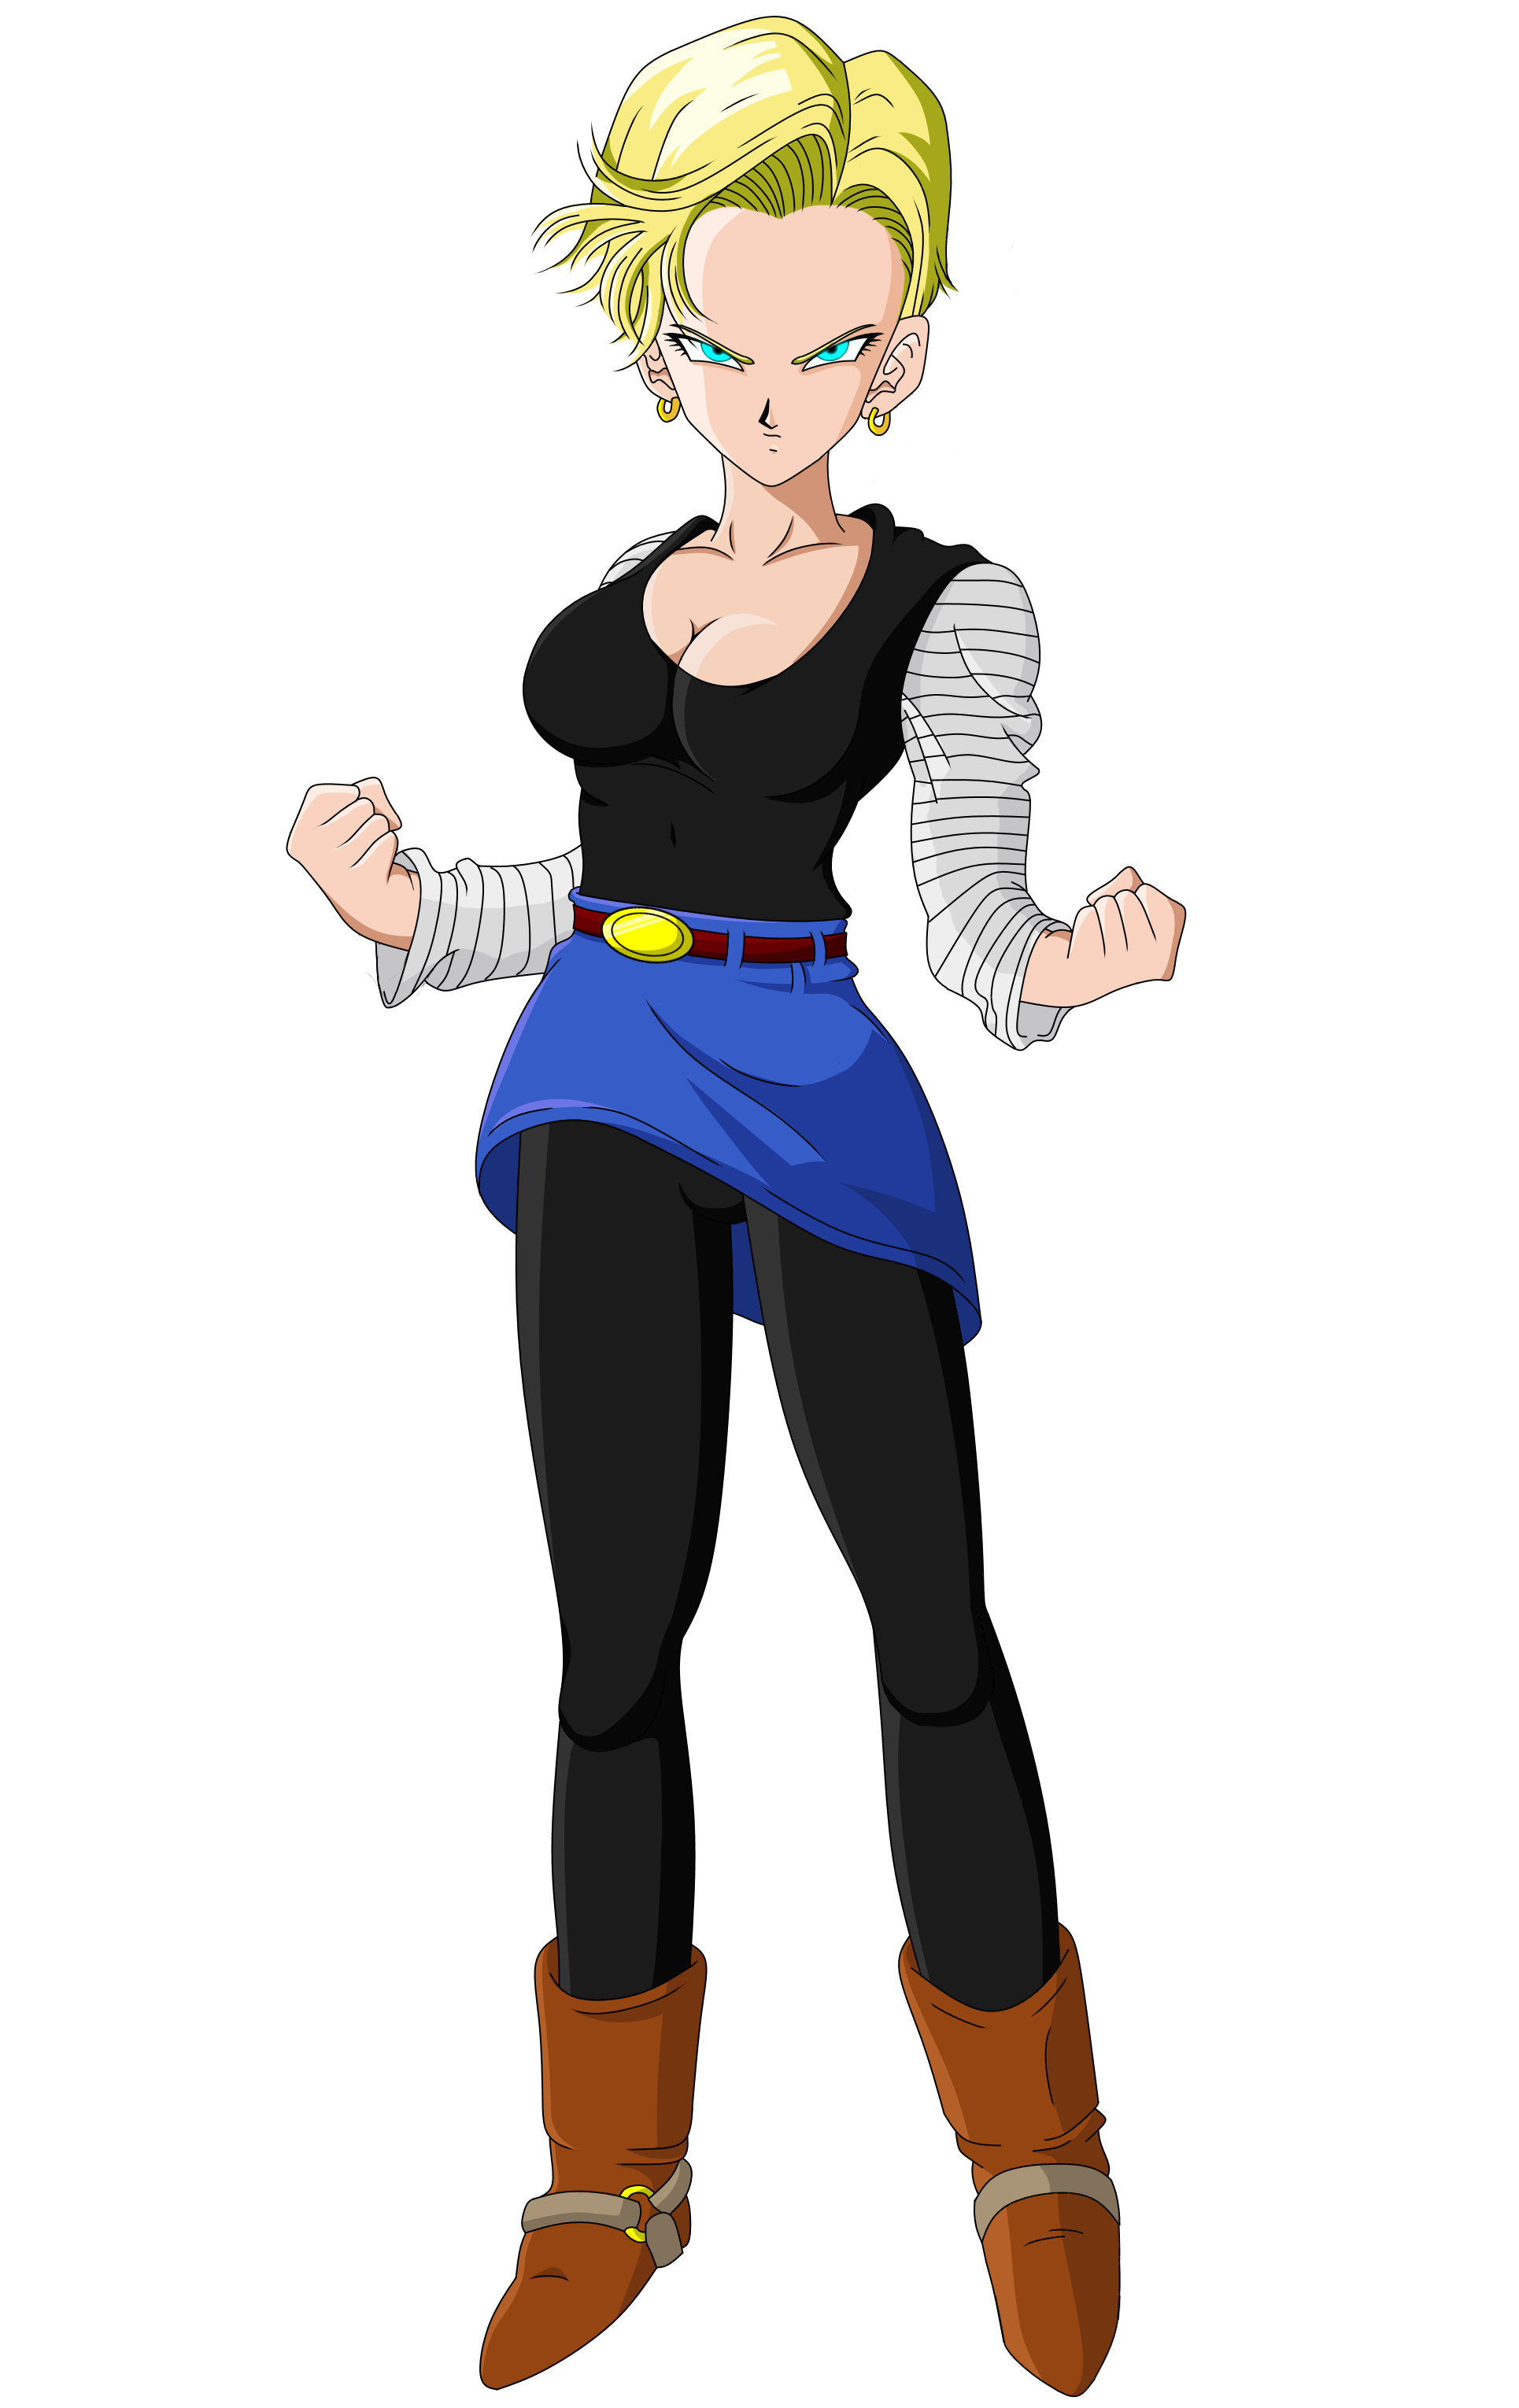 Android 18 - Dragon Ball Z (Short Haired) by ScottishSocialist on